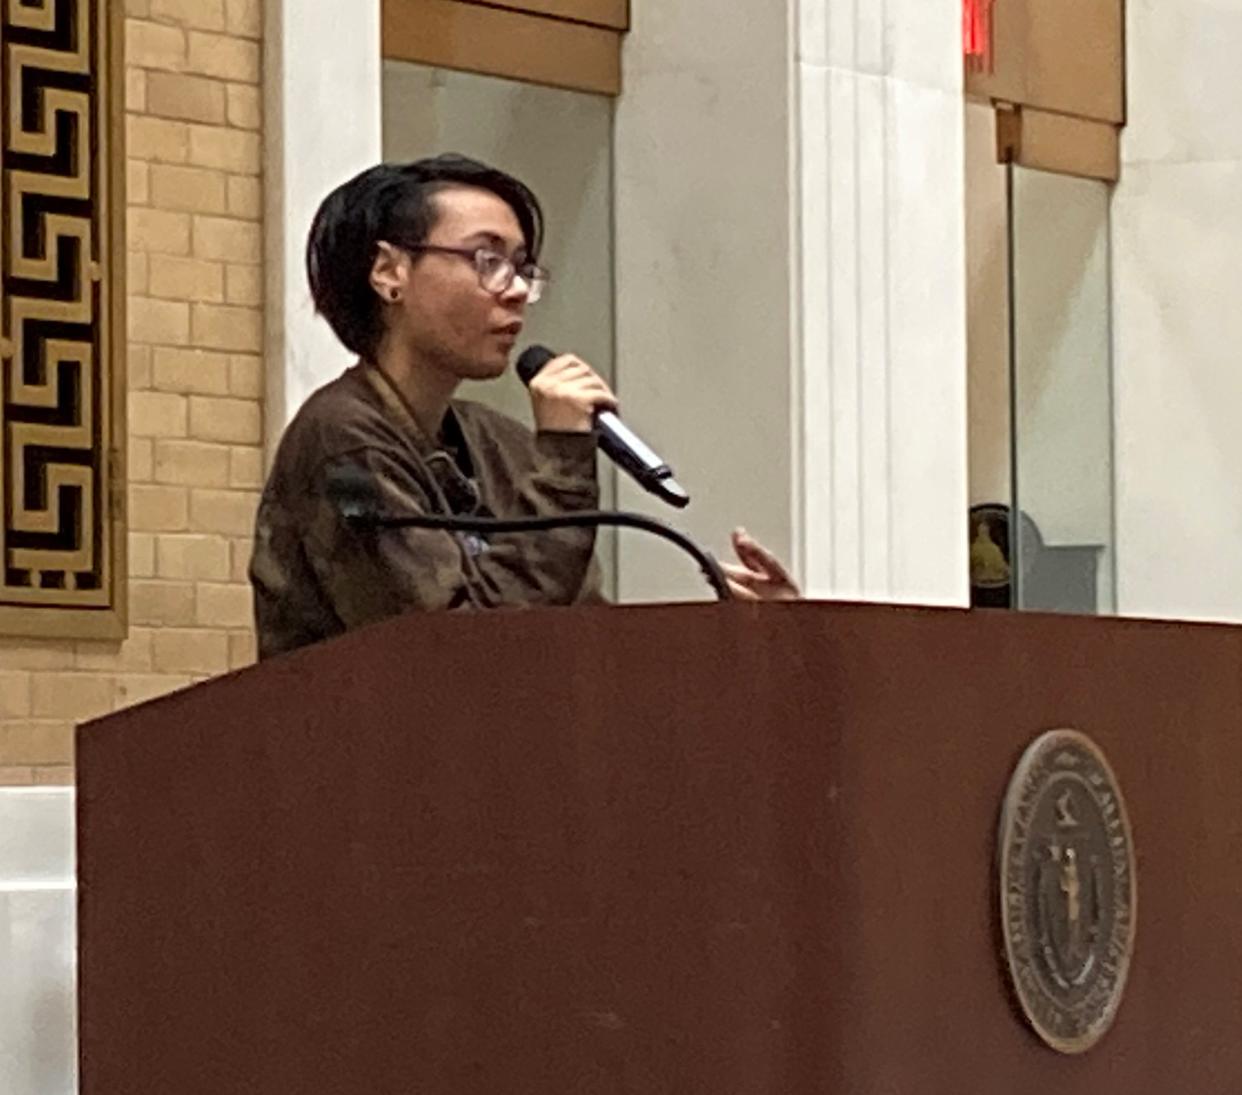 Jack Diaz, a senior at Northwestern University and chronically homeless since 19, discussed the challenges of exiting the cycle that keeps people trapped in homelessness at the Massachusetts Coalition for the Homeless legislative action day Thursday.